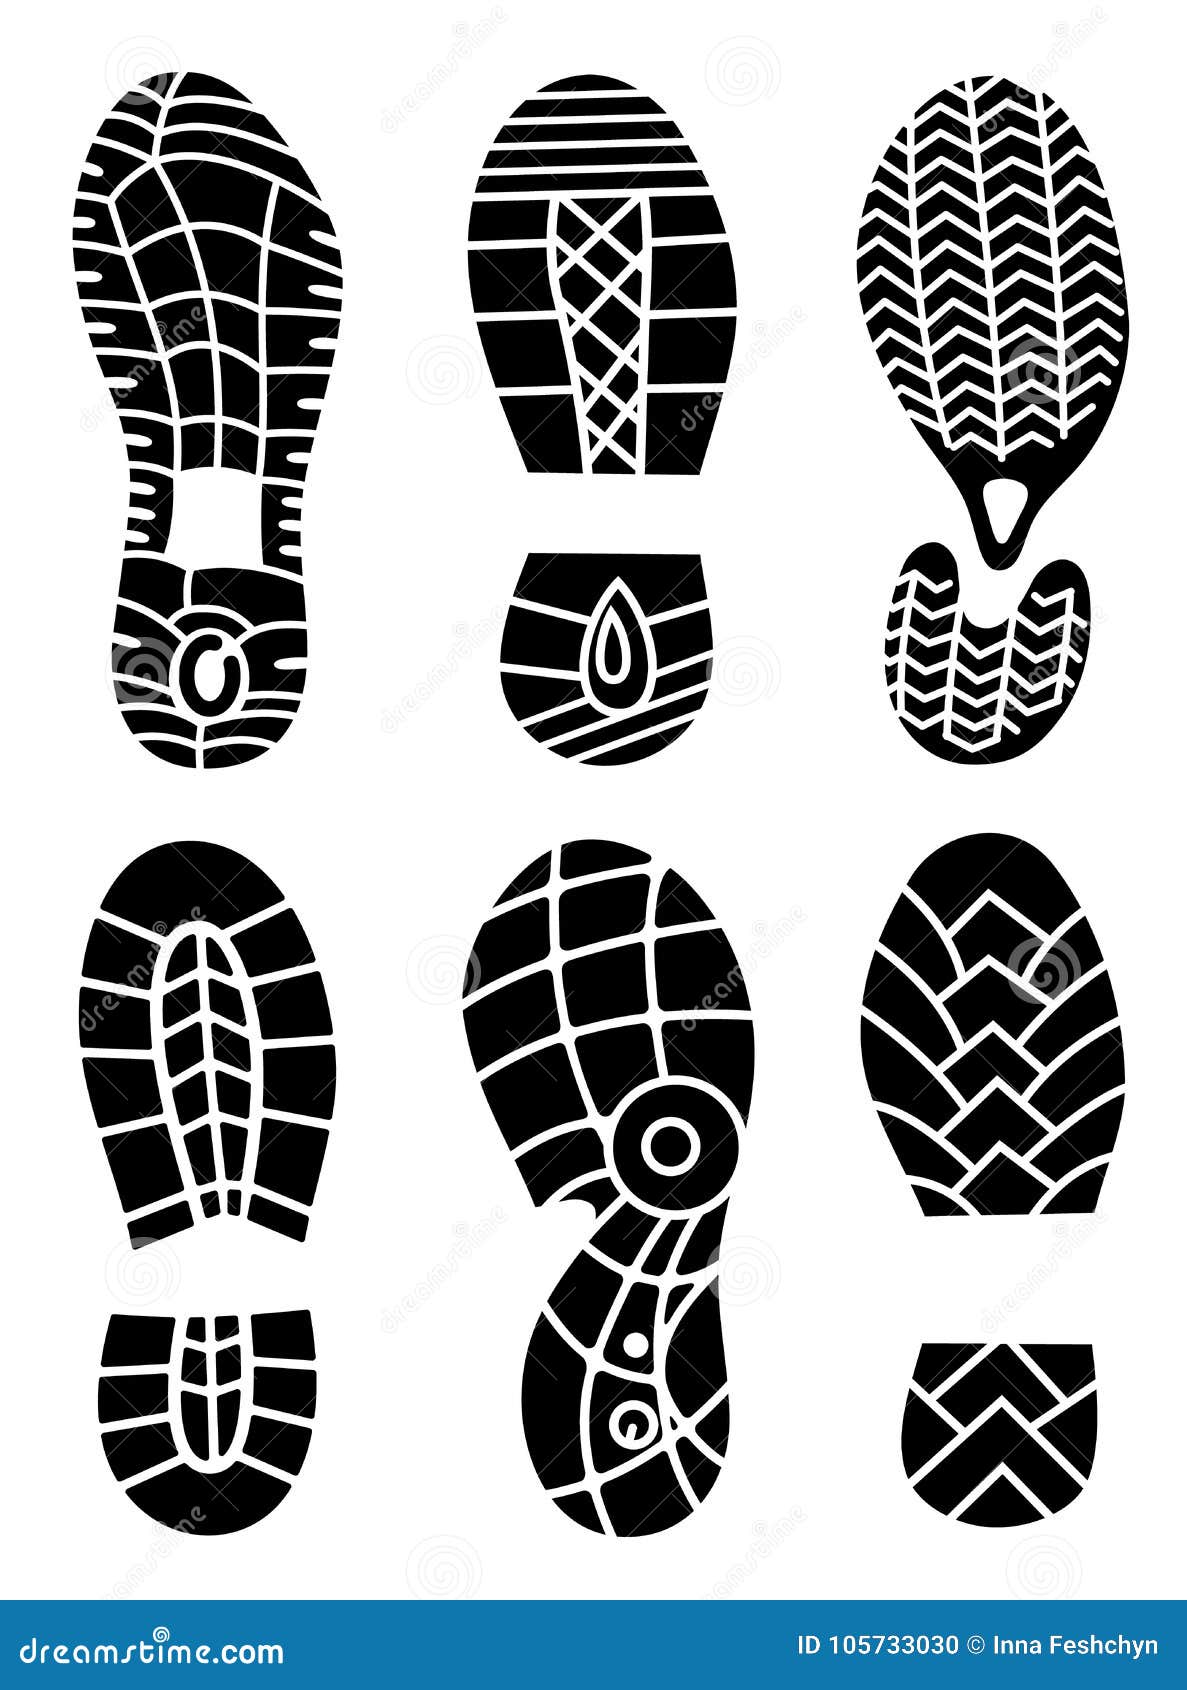 Footprint Icons Isolated on White Background. Vector Art. Collection of ...